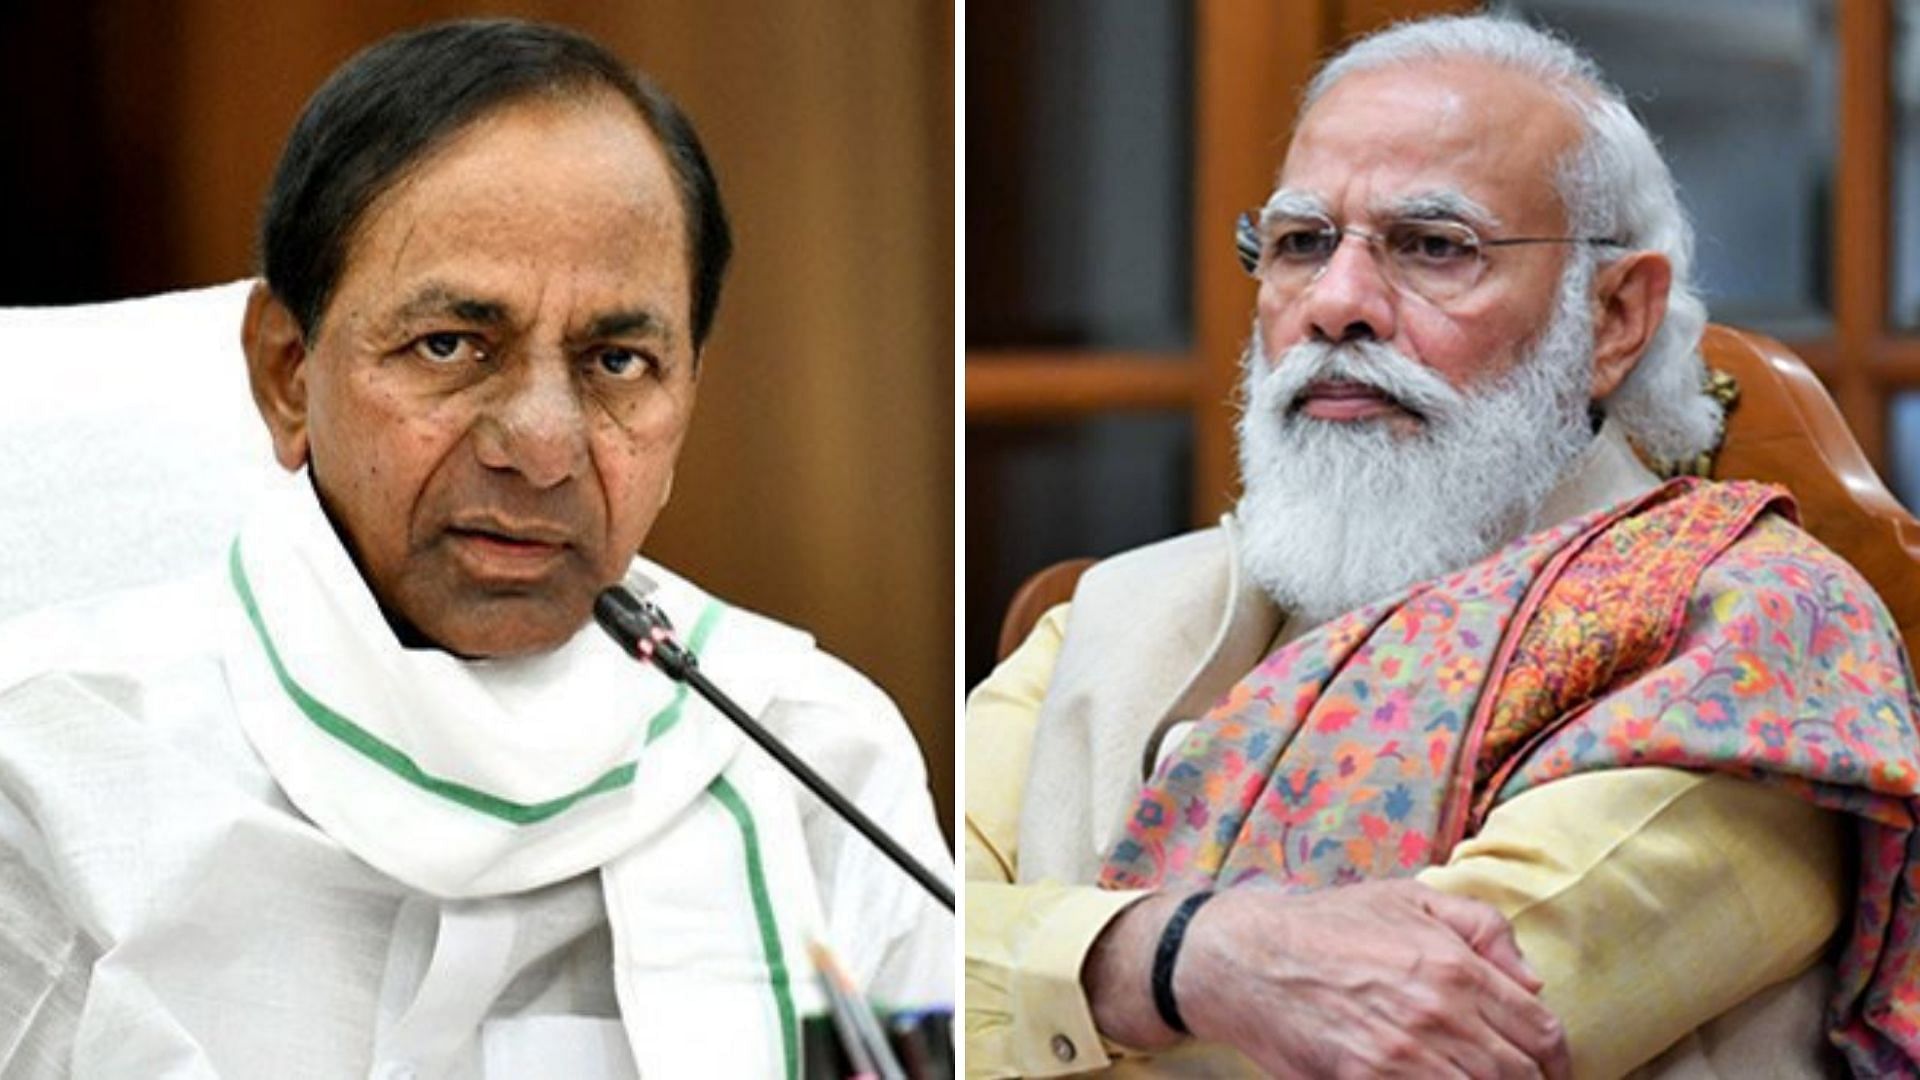 A day after Prime Minister Modi’s visit to Hyderabad, controversy is now brewing about CM KCR not having been invited to receive the Prime Minister.